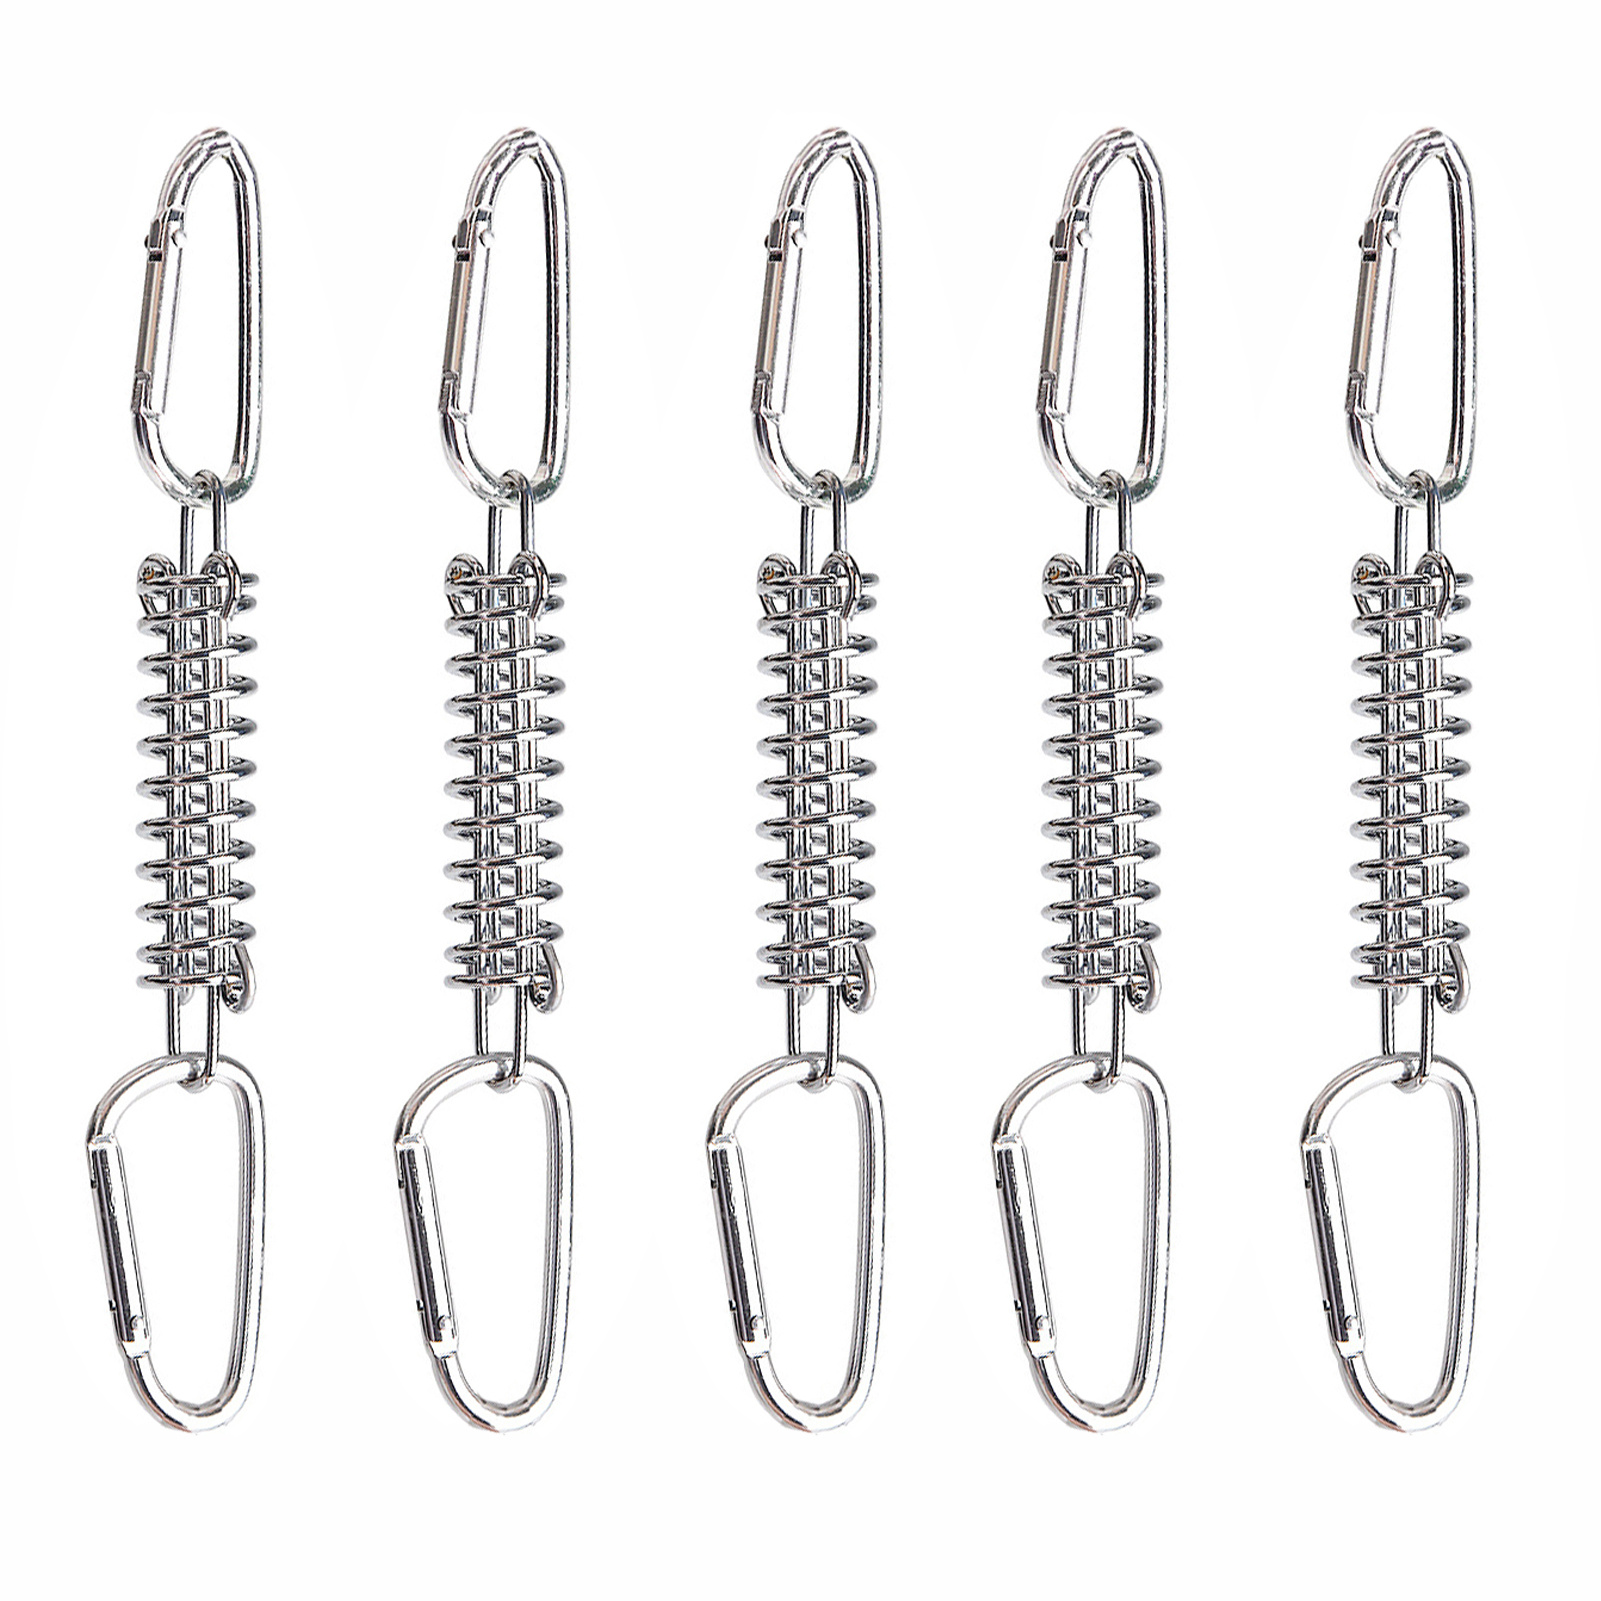 

5pcs Aluminum Alloy Tent Stakes With Carabiner - Windproof Awning Spring Fixing Nails Outdoor Camping Rope Tightener Cord Tensioner Buckle